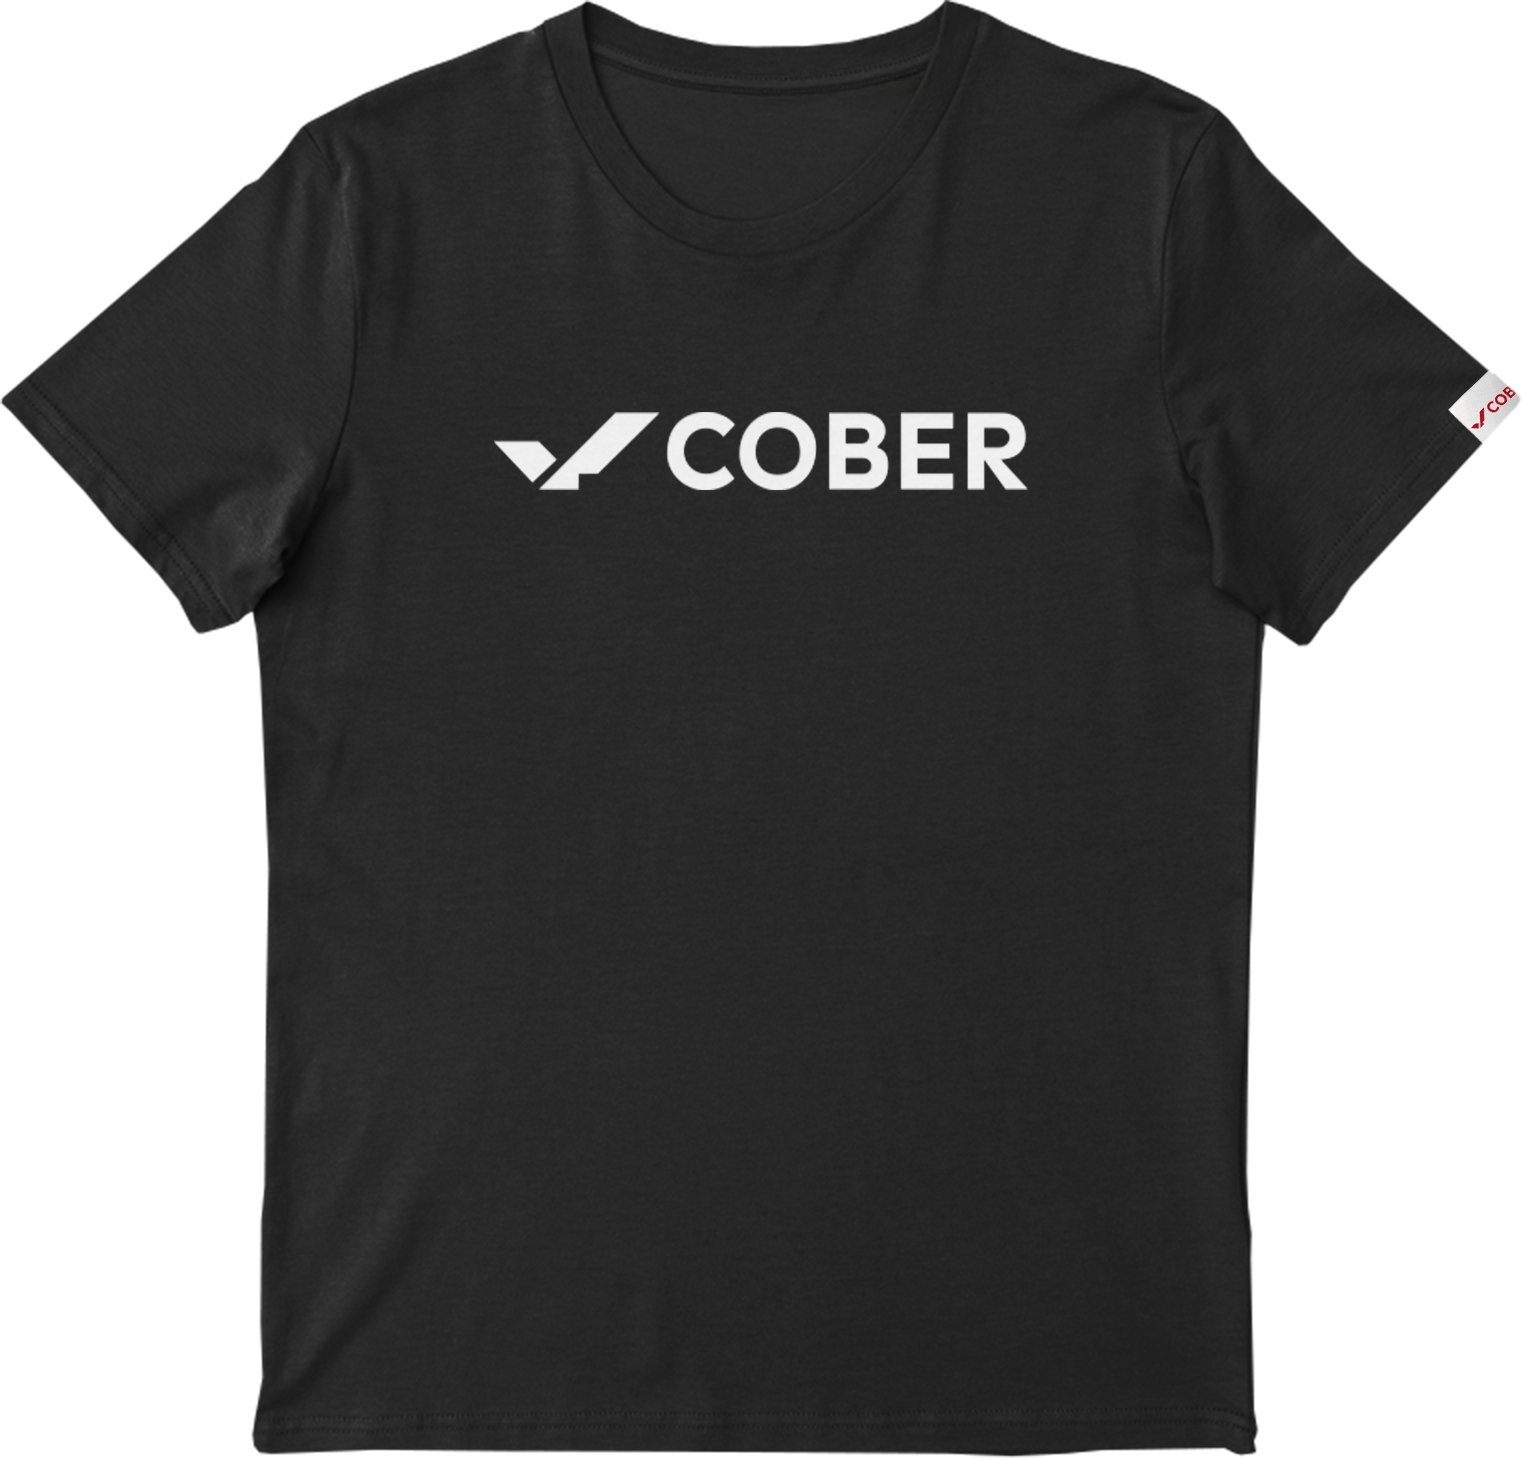 T-shirt-eagle-black-Clothing-and-Accessories-Cober